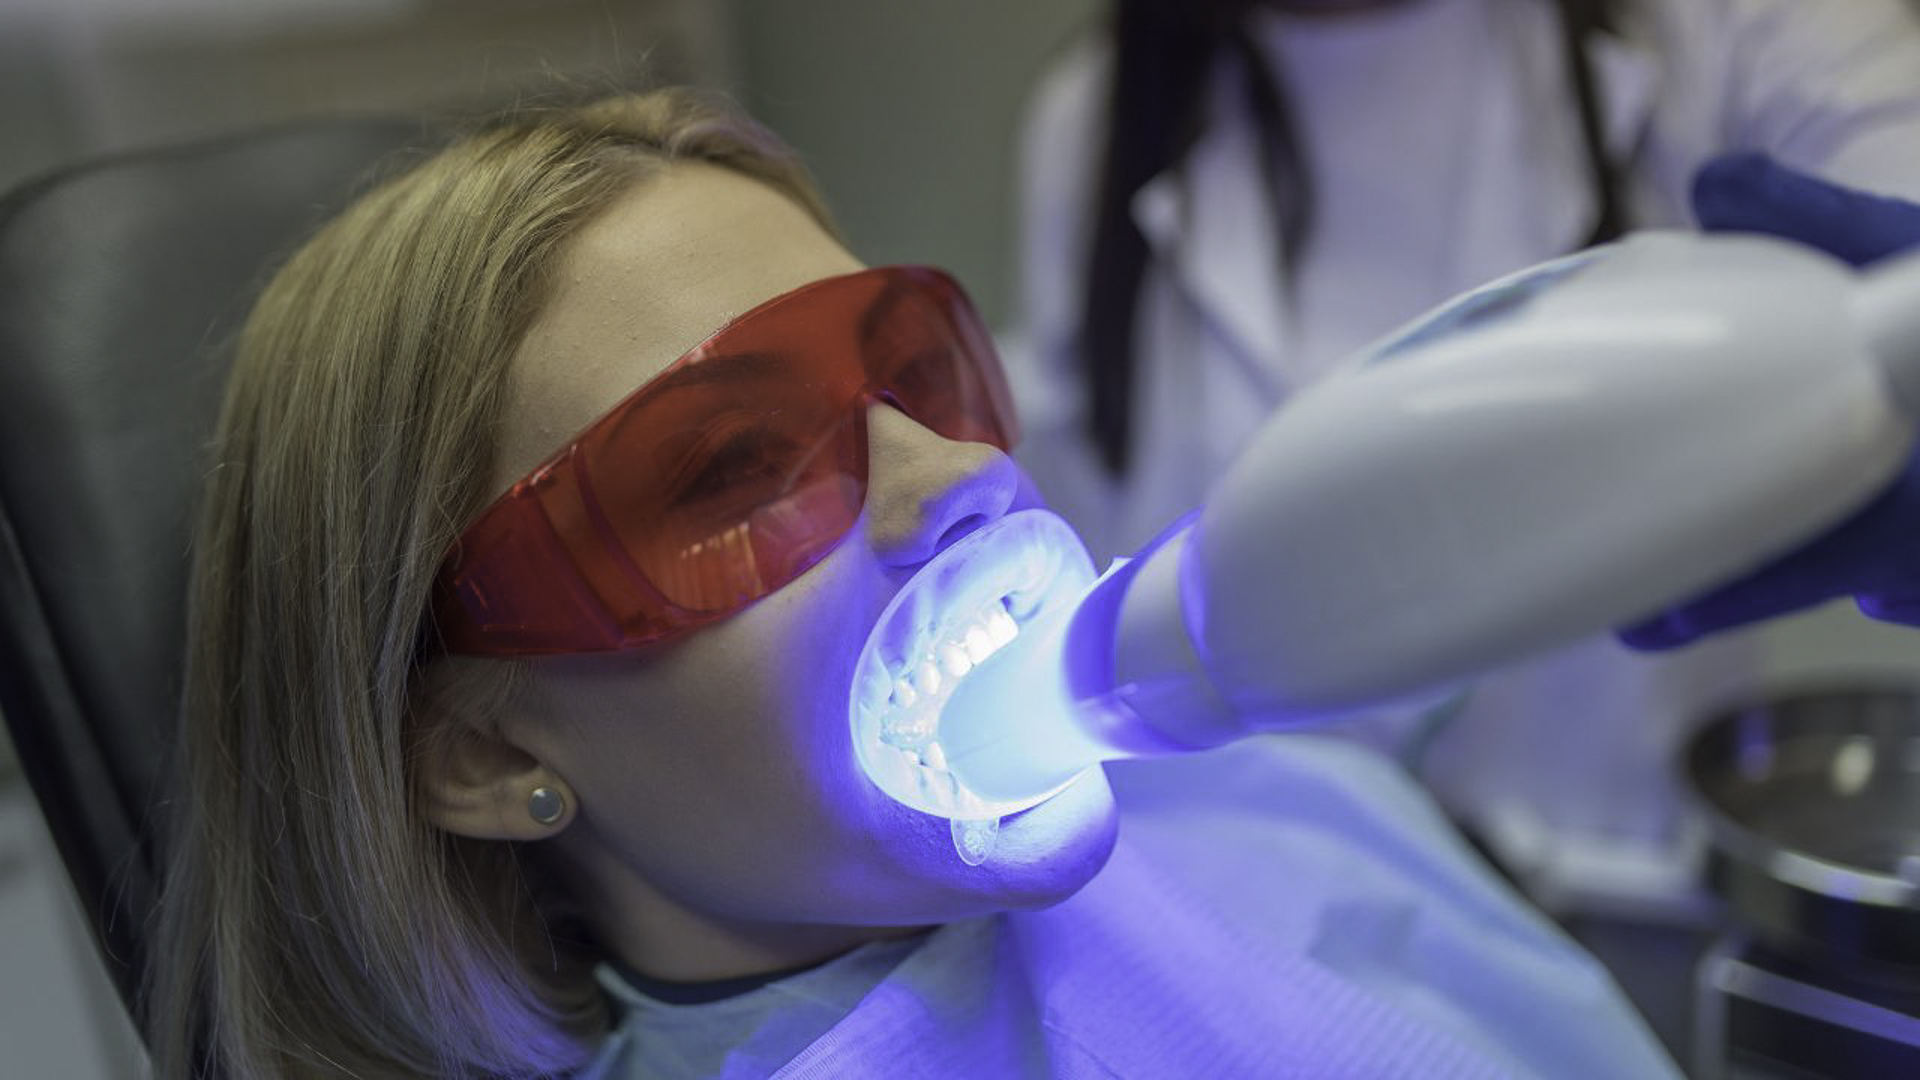 A patient at the dentist having a laser teeth whitening procedure done